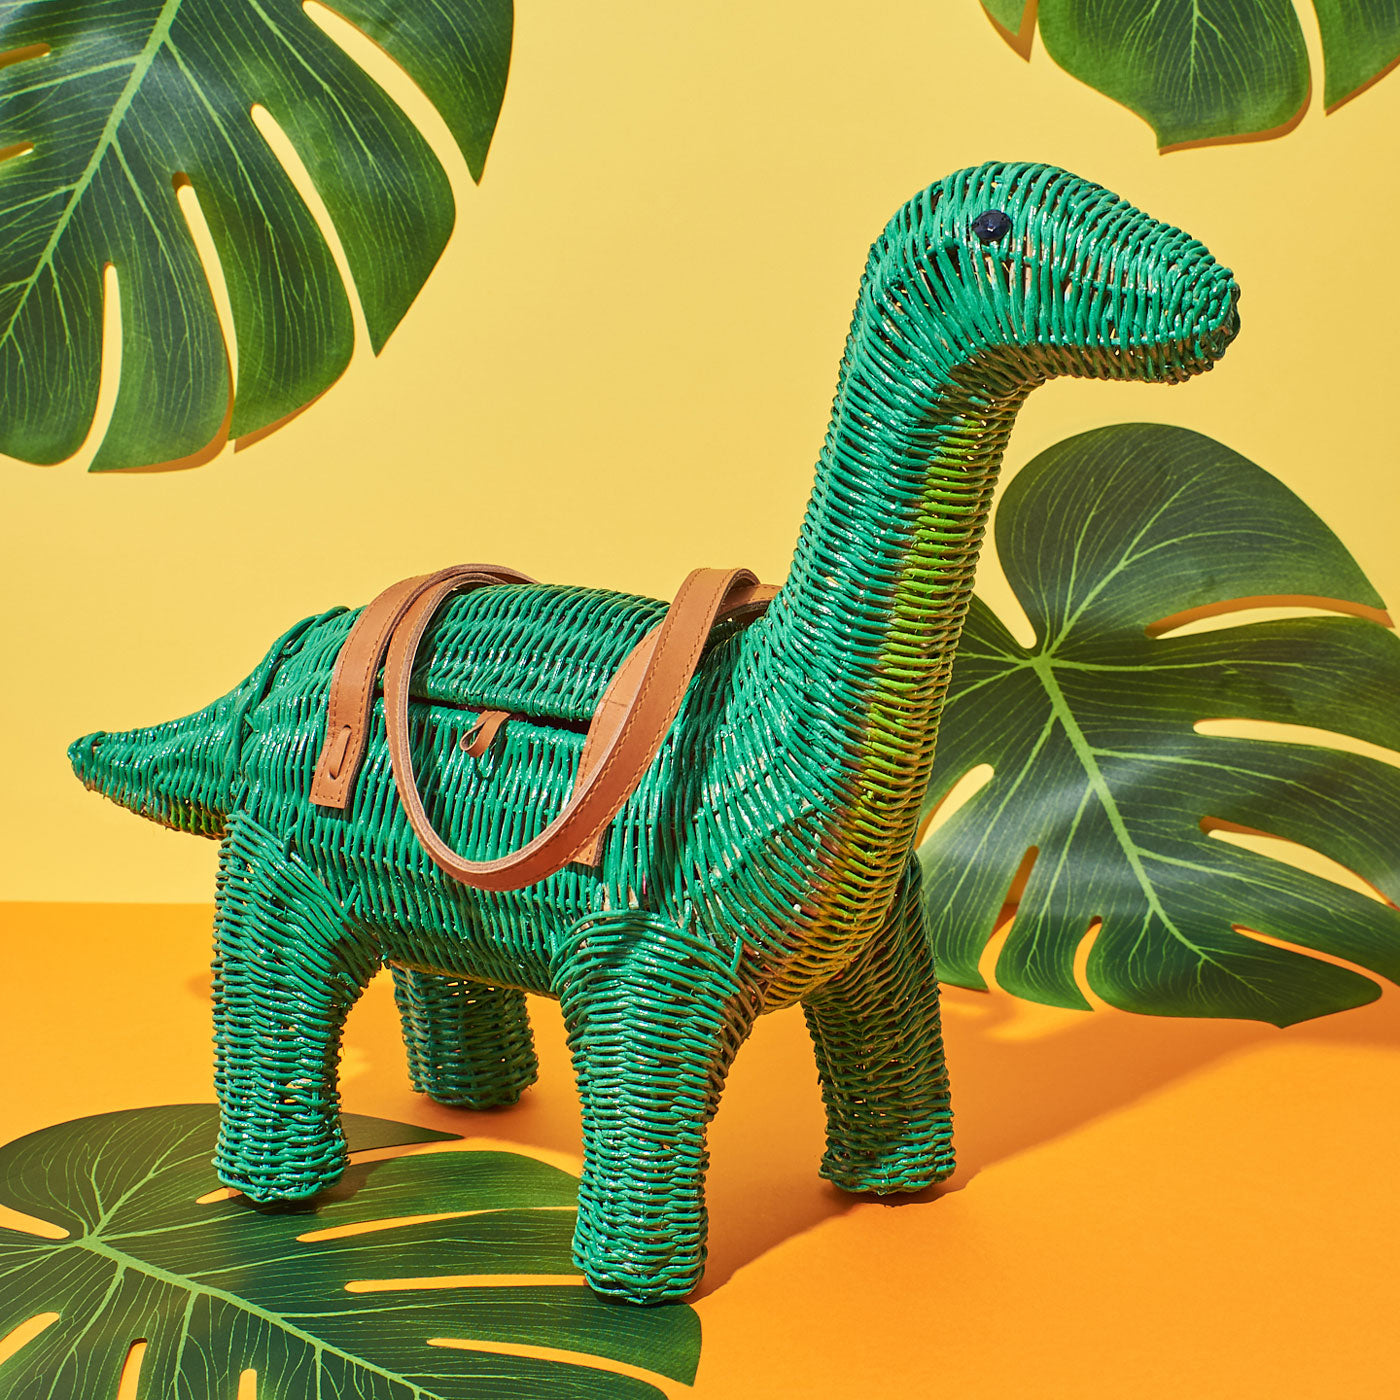 Wicker Darling's green Charlotte Bronte-saurus on a colourful background with green Monstera leaves